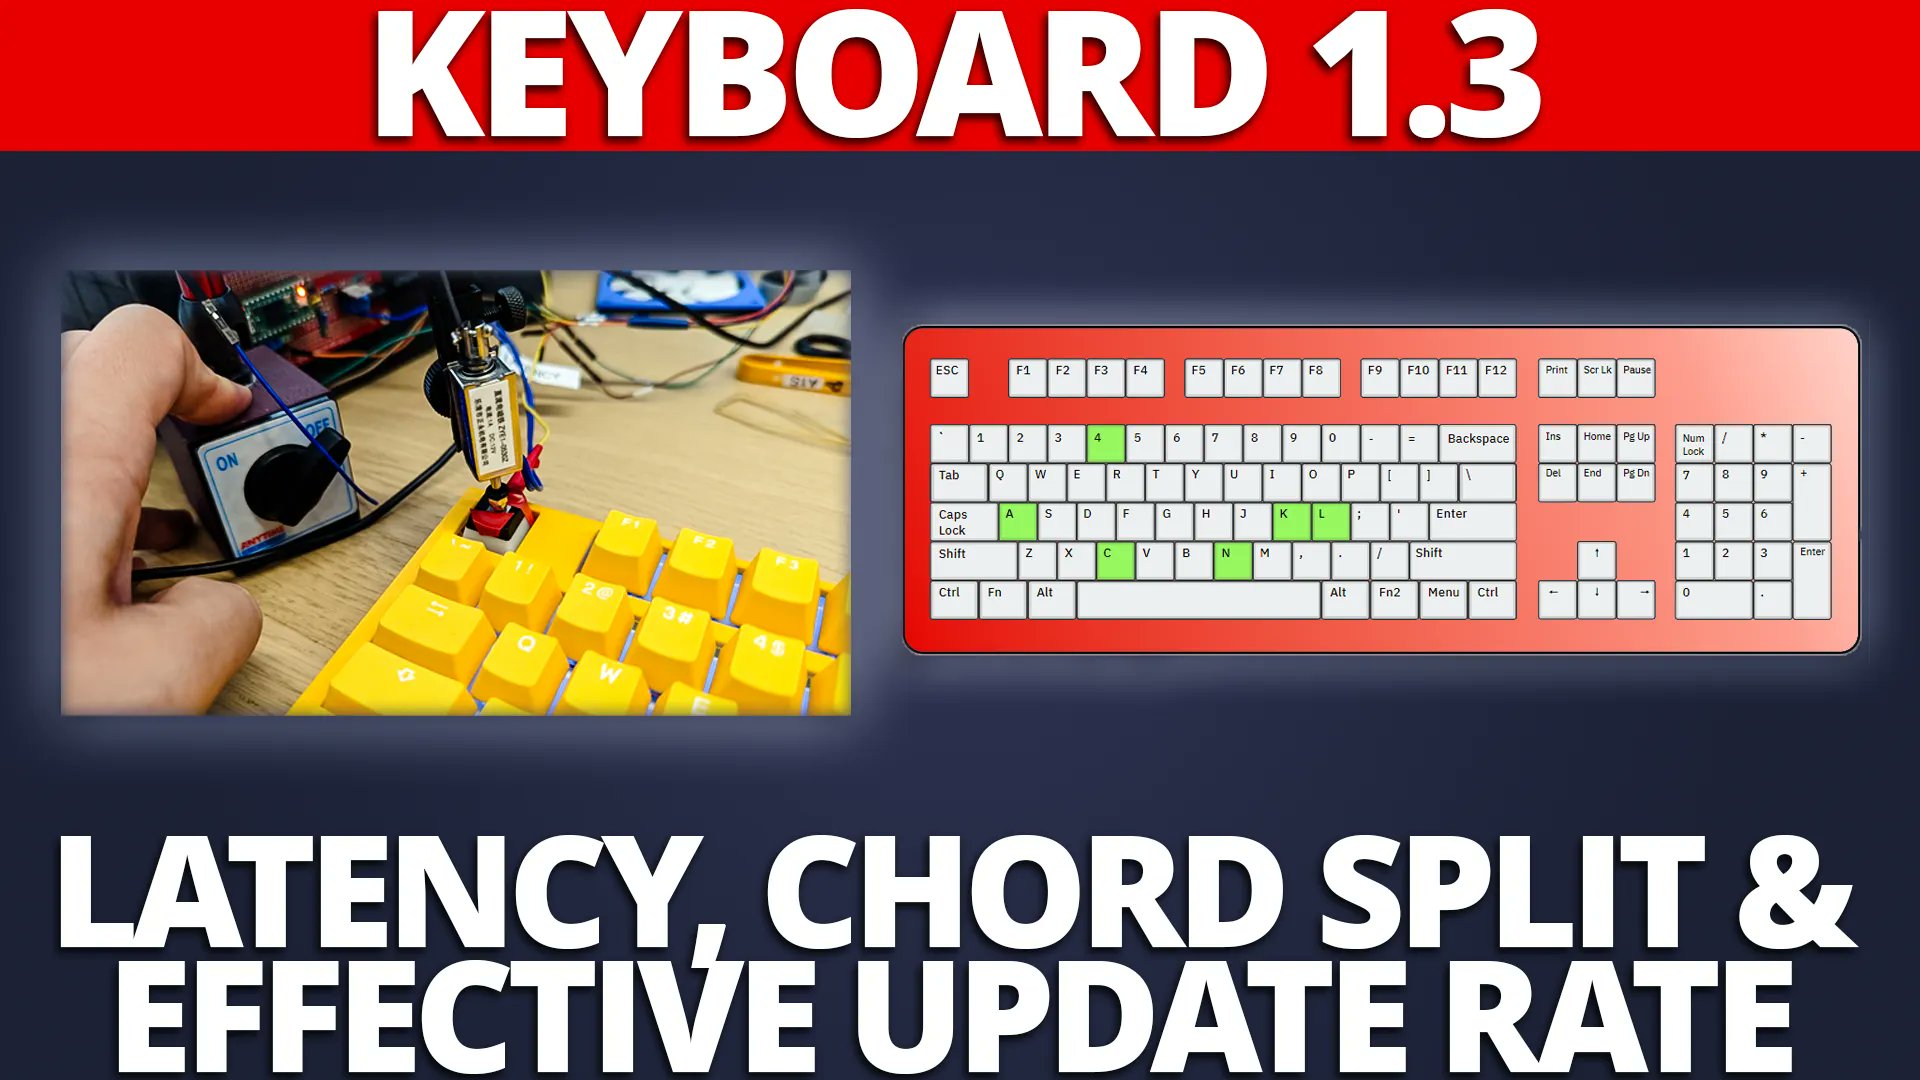 Our Keyboard Typing Experience Tests: Latency 